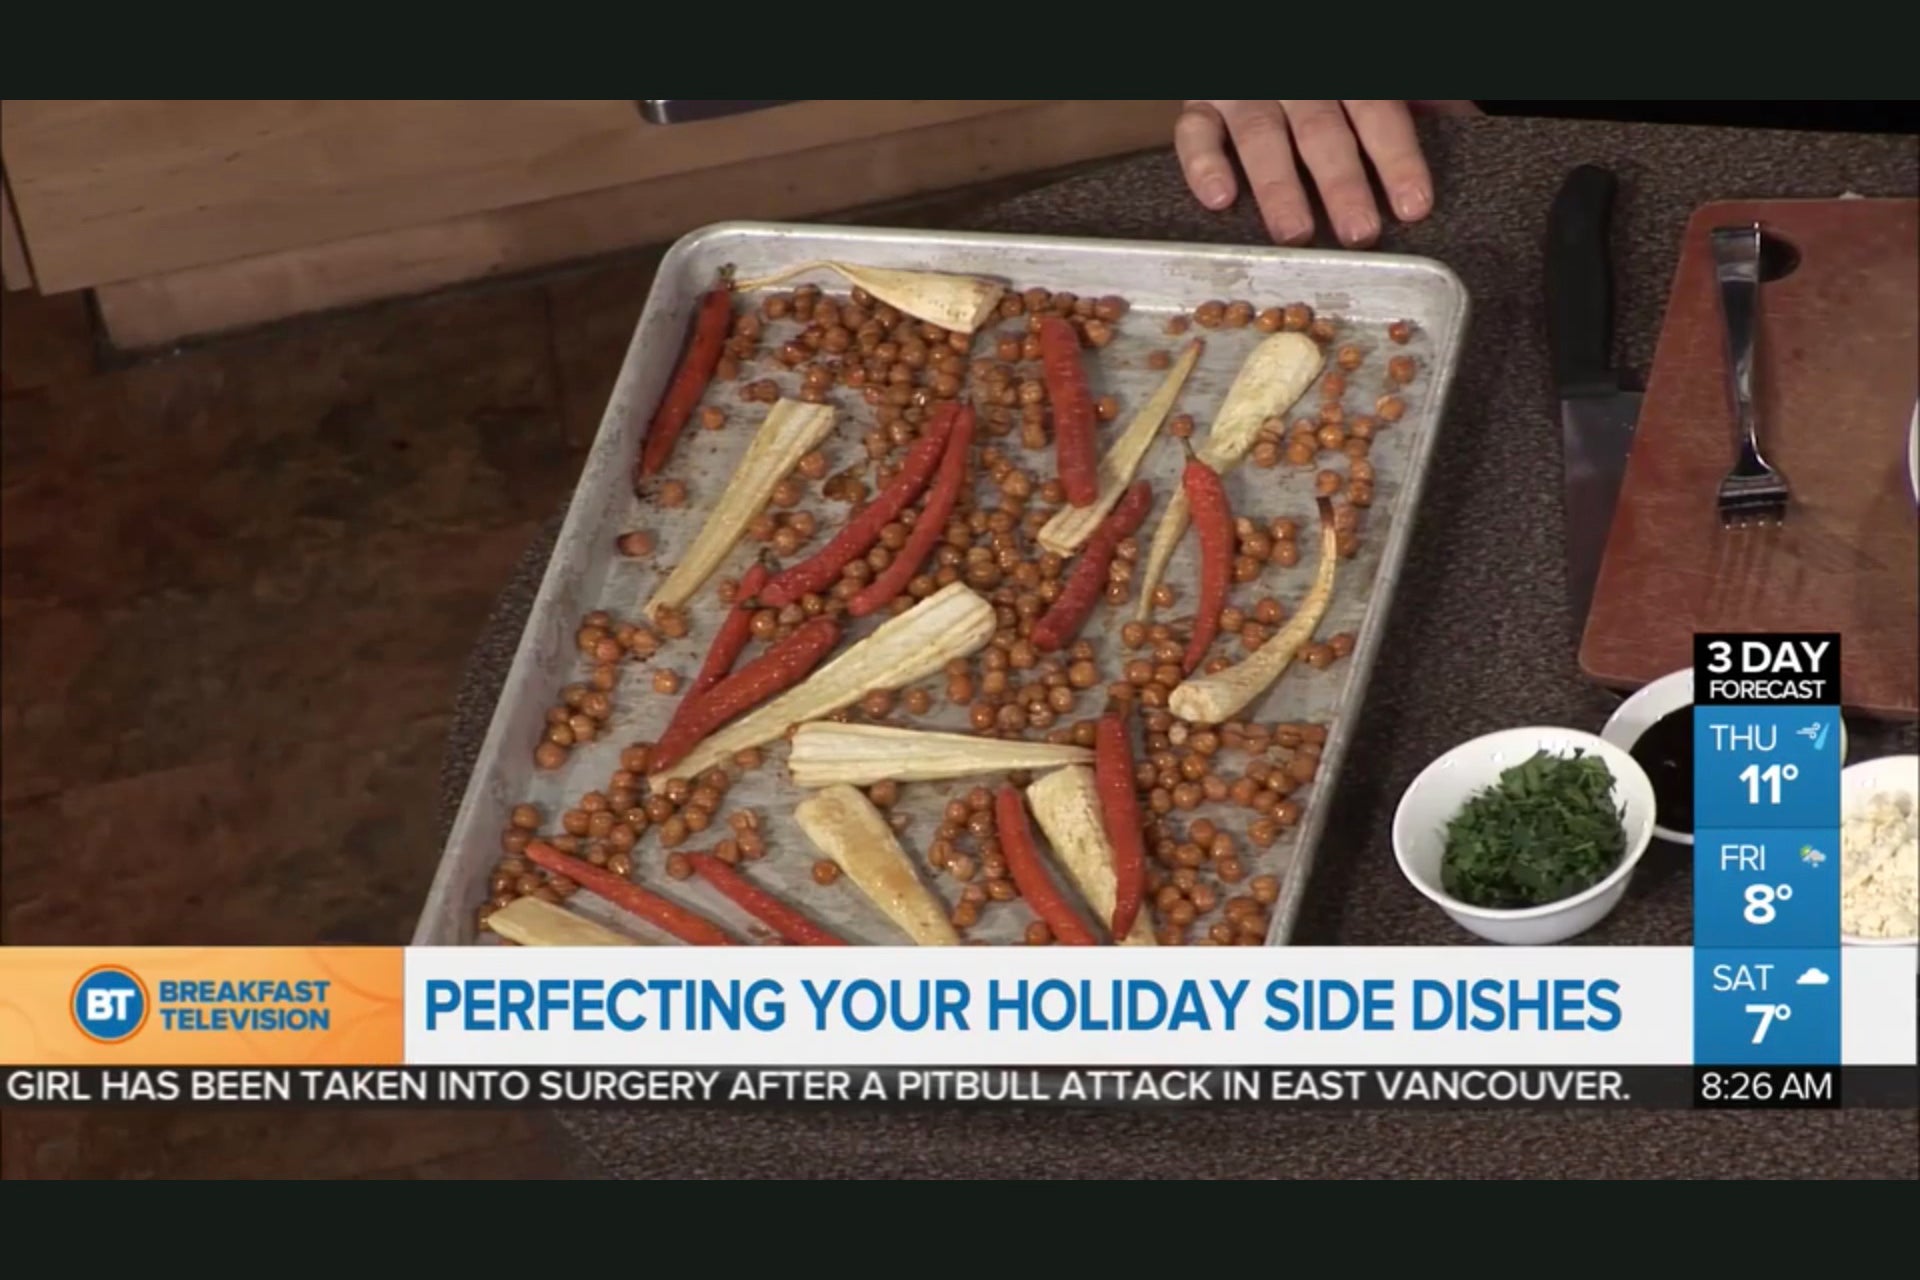 Sweet and Spicy Roasted Carrots with Parsnips and Chickpeas: Holiday Dinner Side Dishes - As seen on Breakfast TV